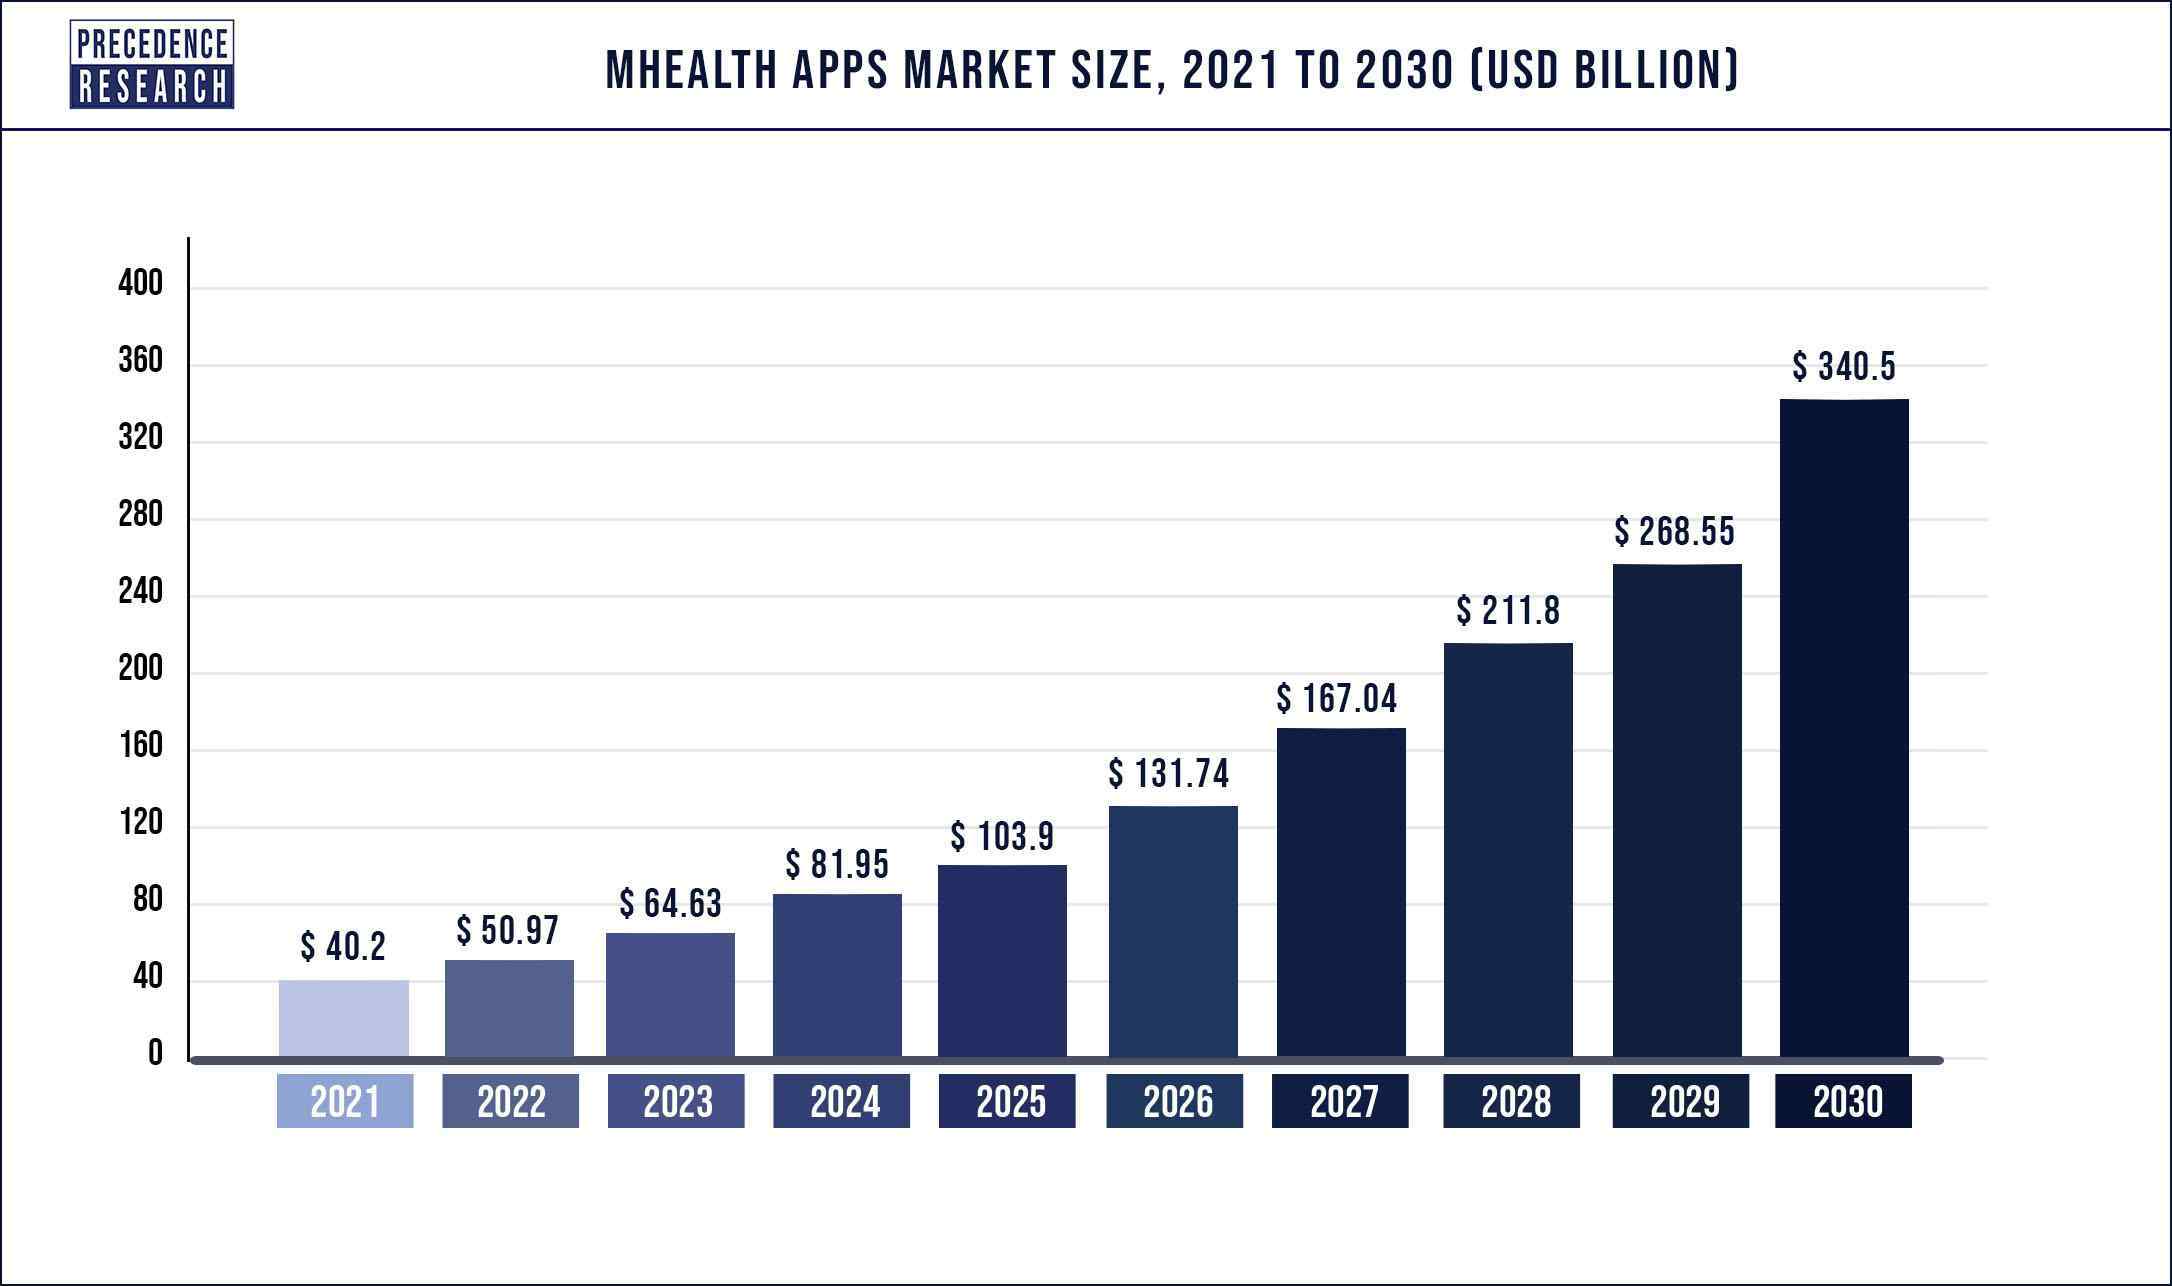 mHealth Apps Market Size 2021 to 2030